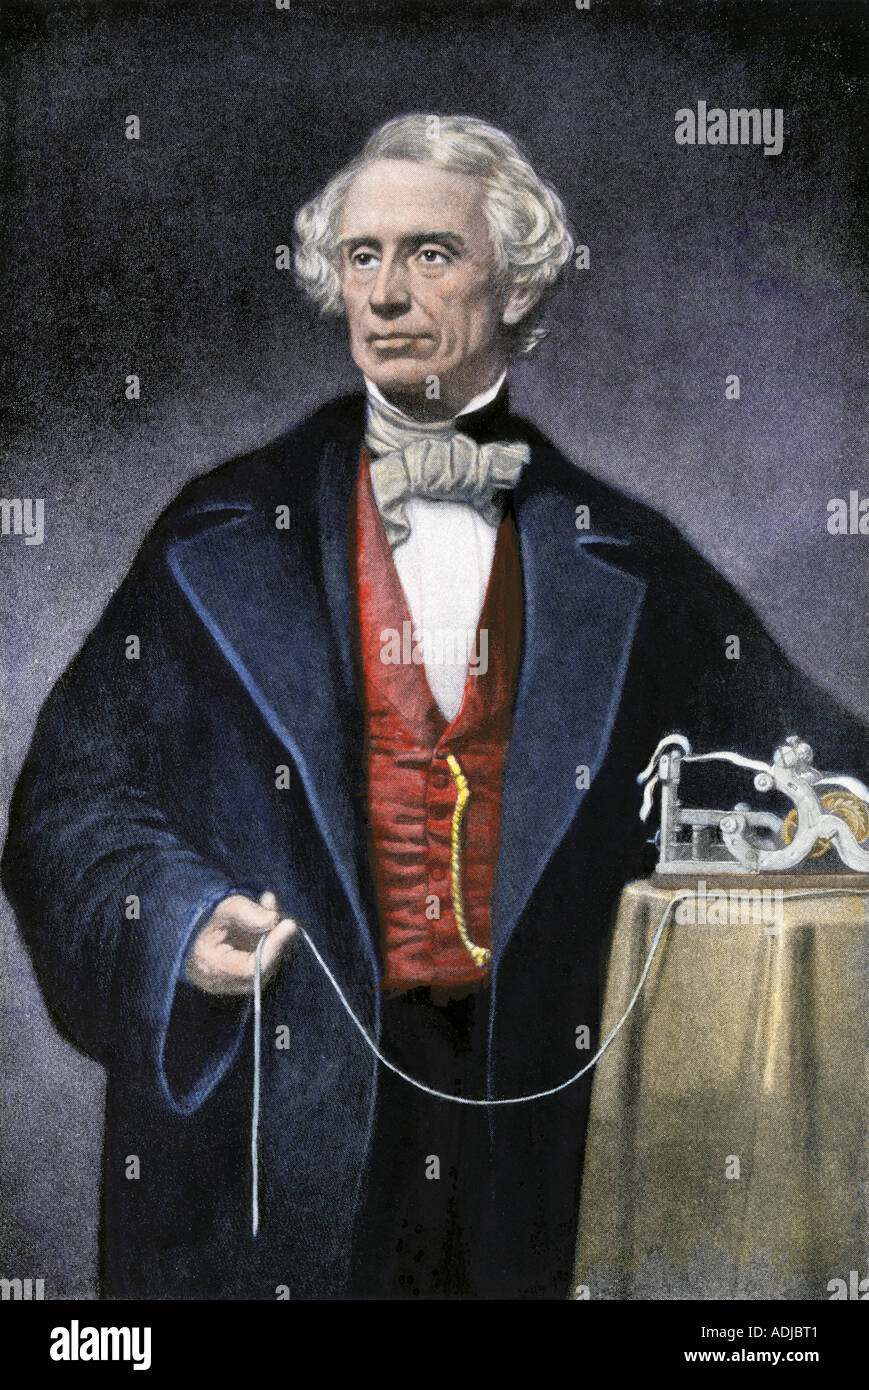 Samuel Morse with his invention the telegraph. Hand-colored halftone of an illustration Stock Photo